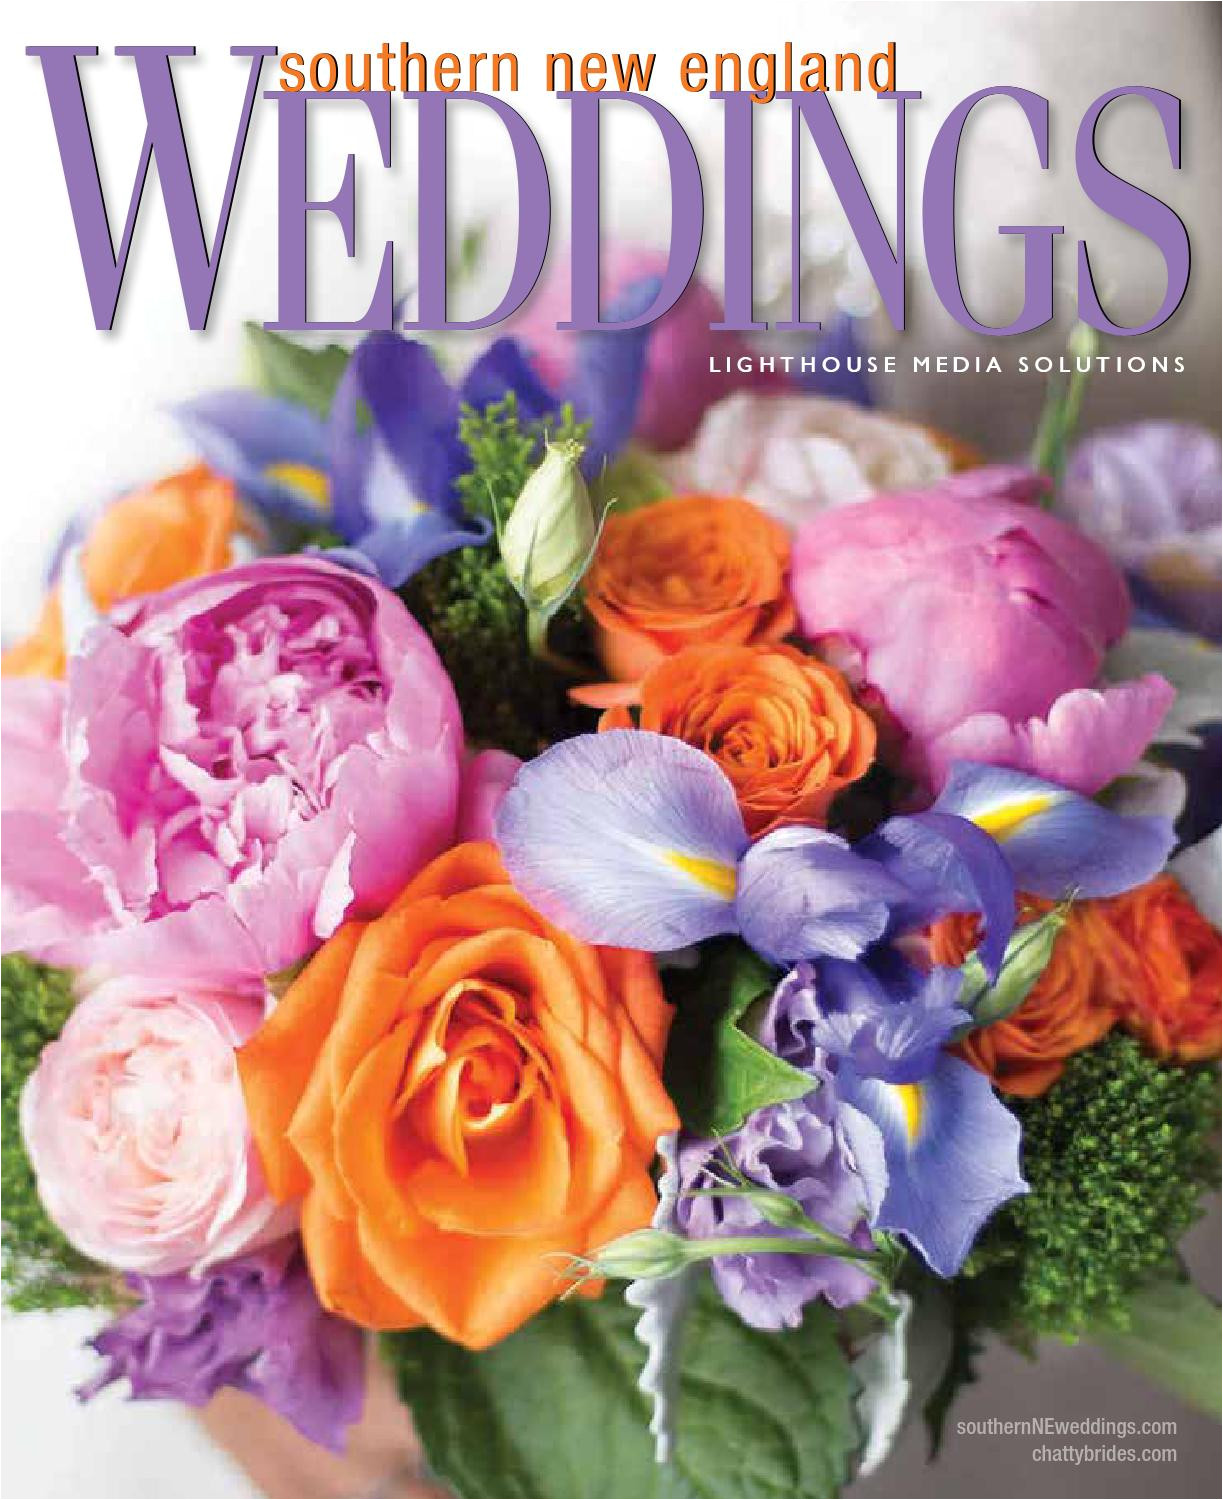 southern new england weddings by formerly lighthouse media solutions issuu